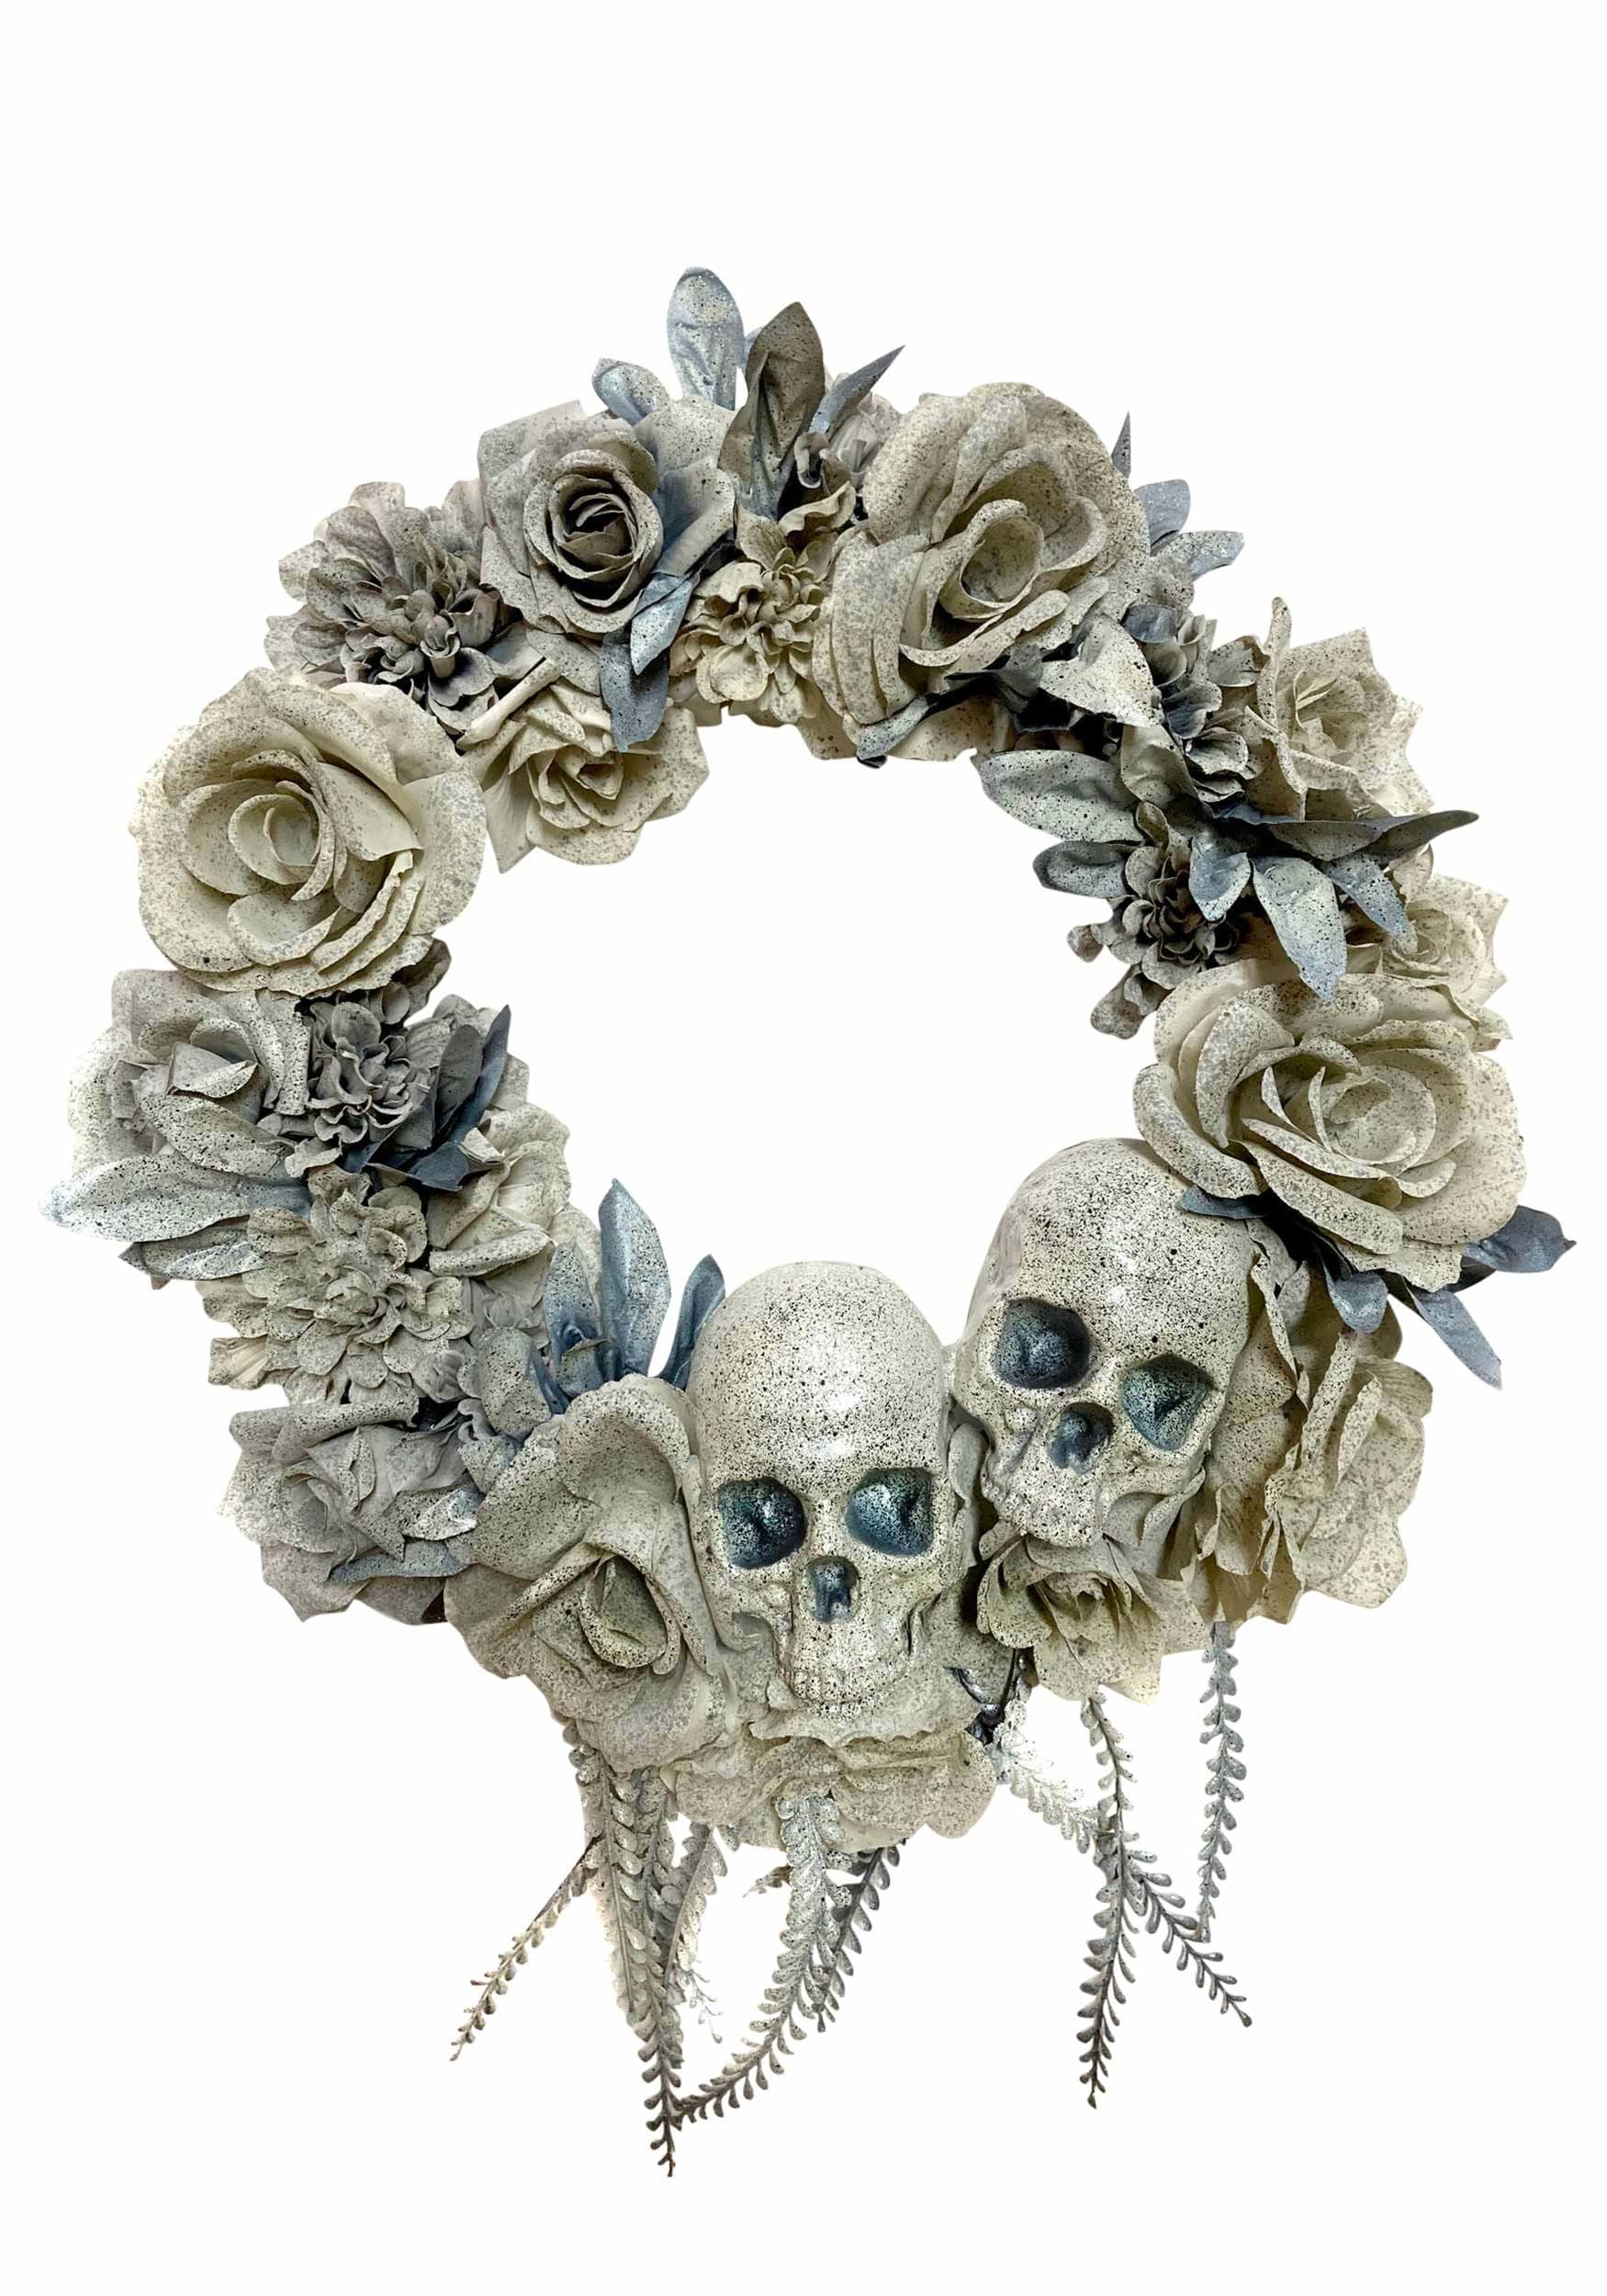 Photos - Other interior and decor SunStar Industries 20" Faux Stone Skull & Roses Wreath Decoration | Hallow 